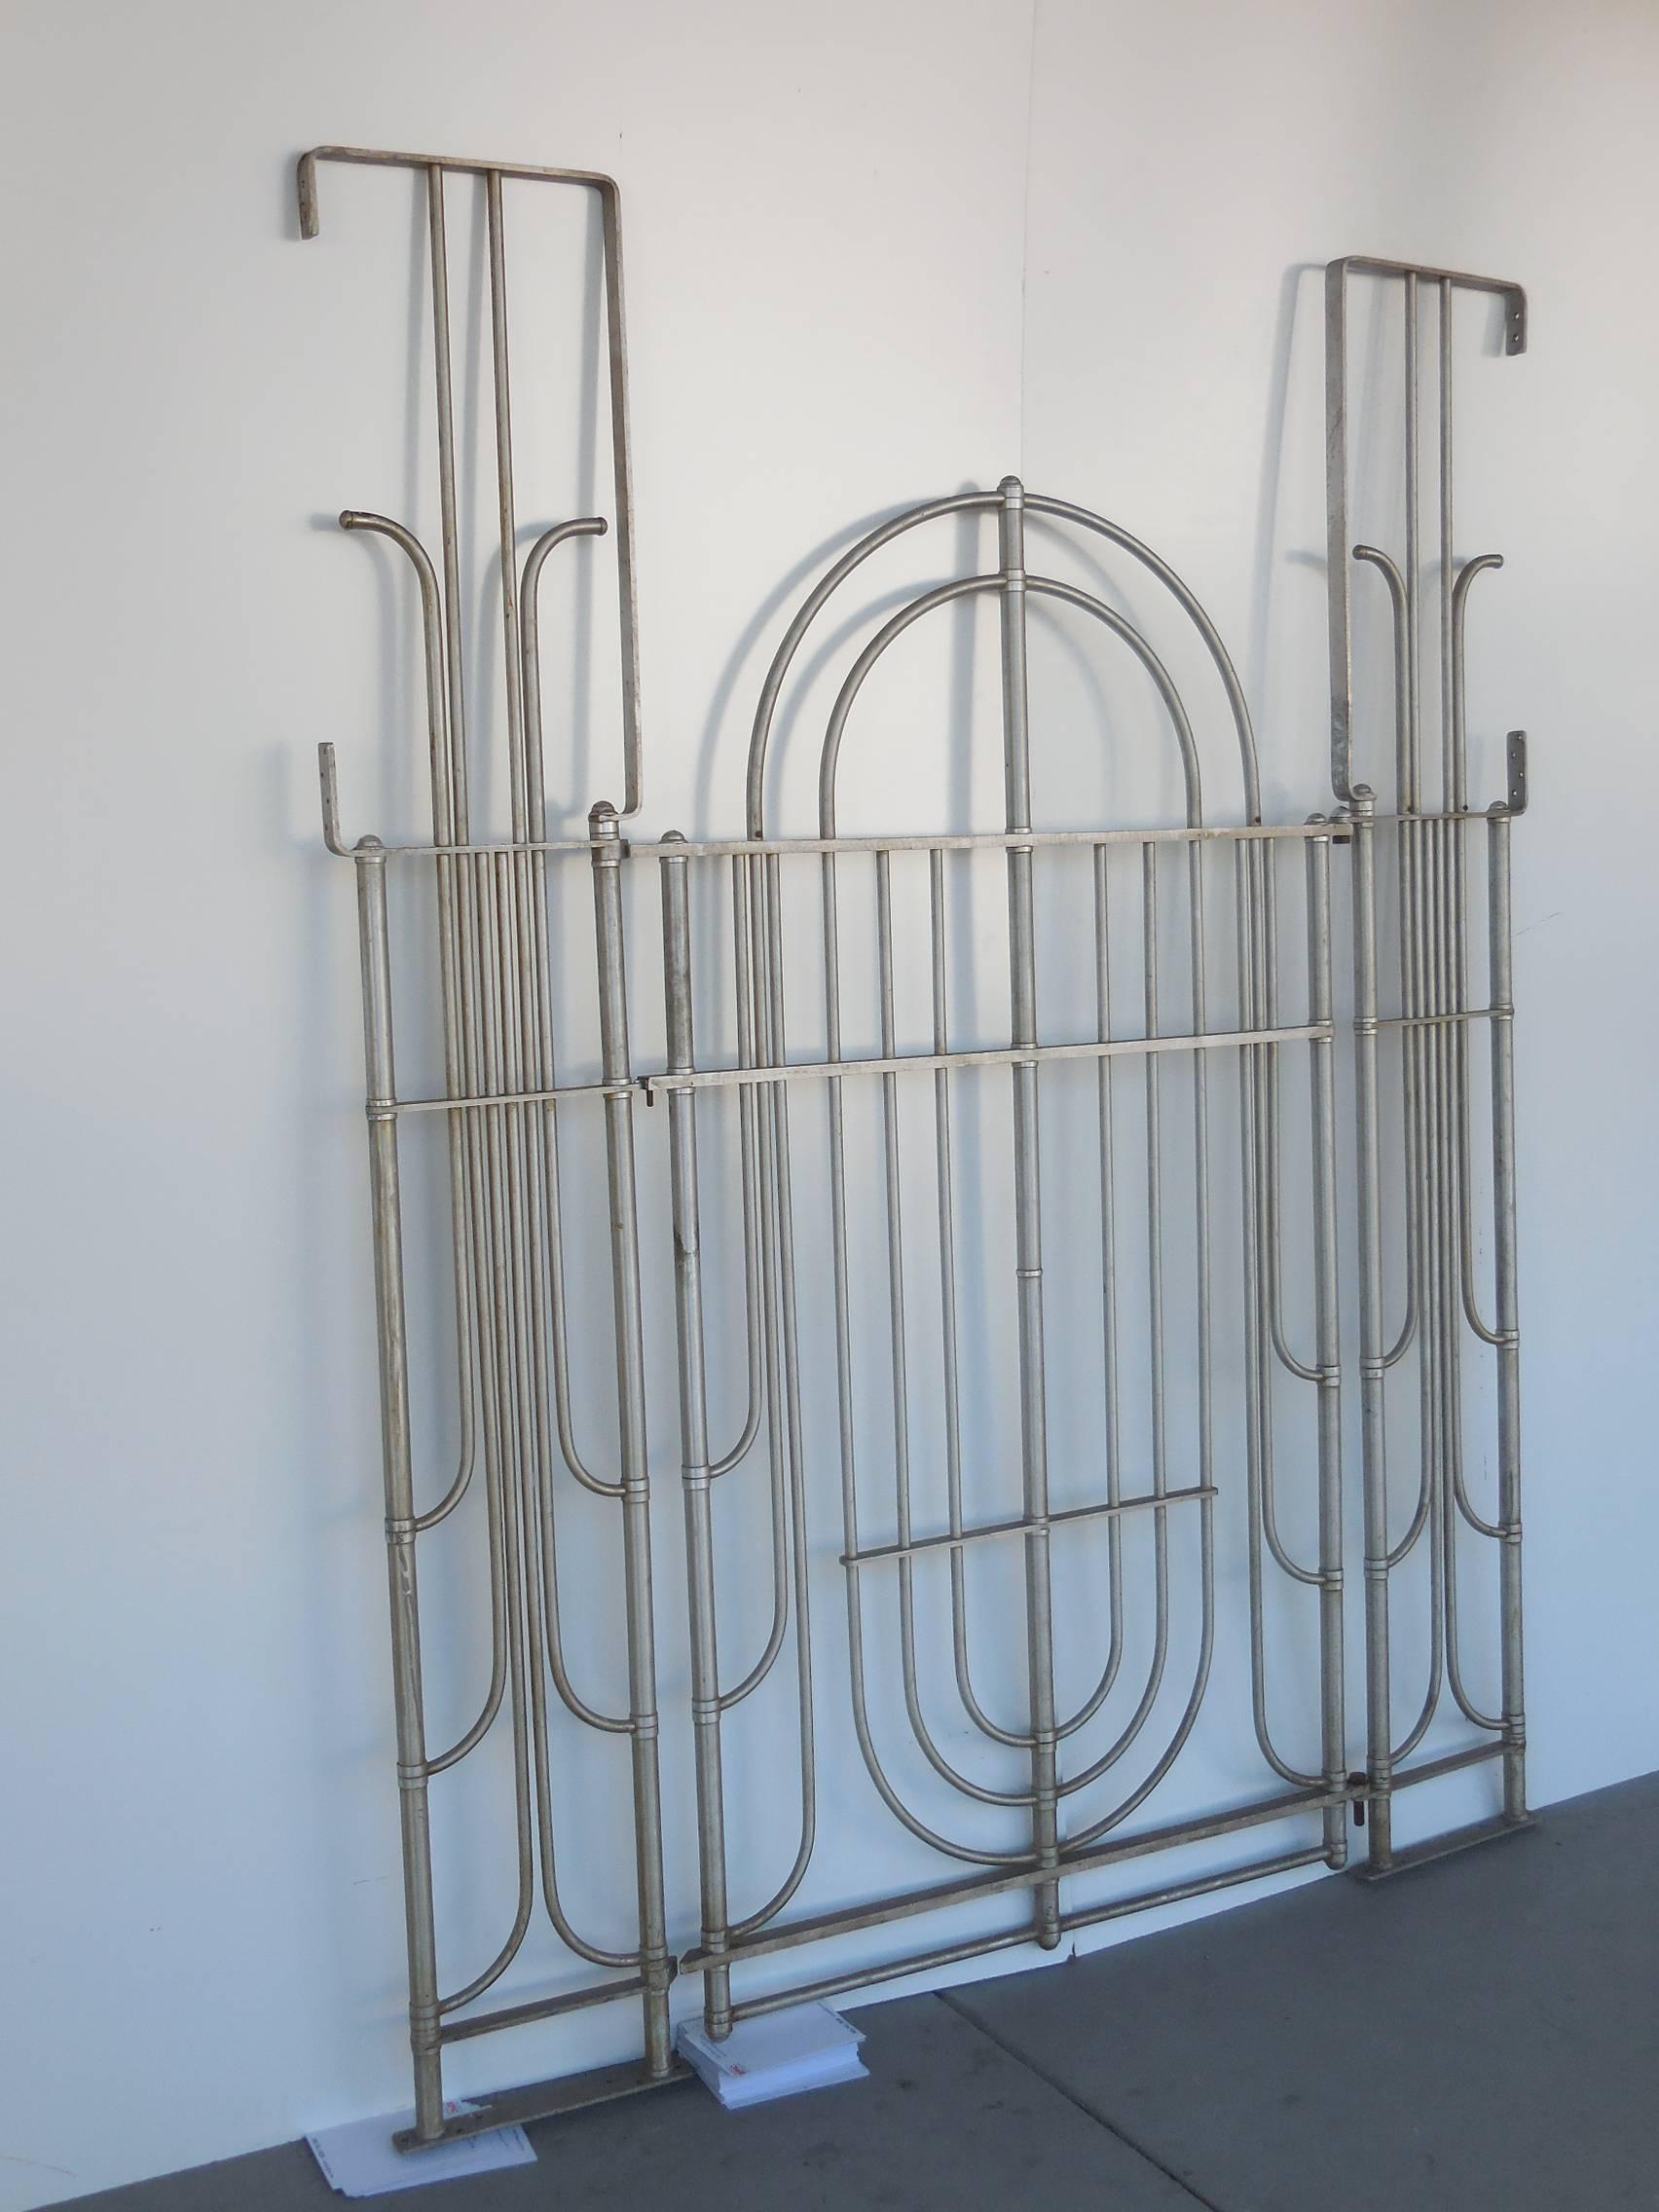 Extraordinary and rare Art Deco gate by Warren McArthur. This is a three part gate, aluminum construction.